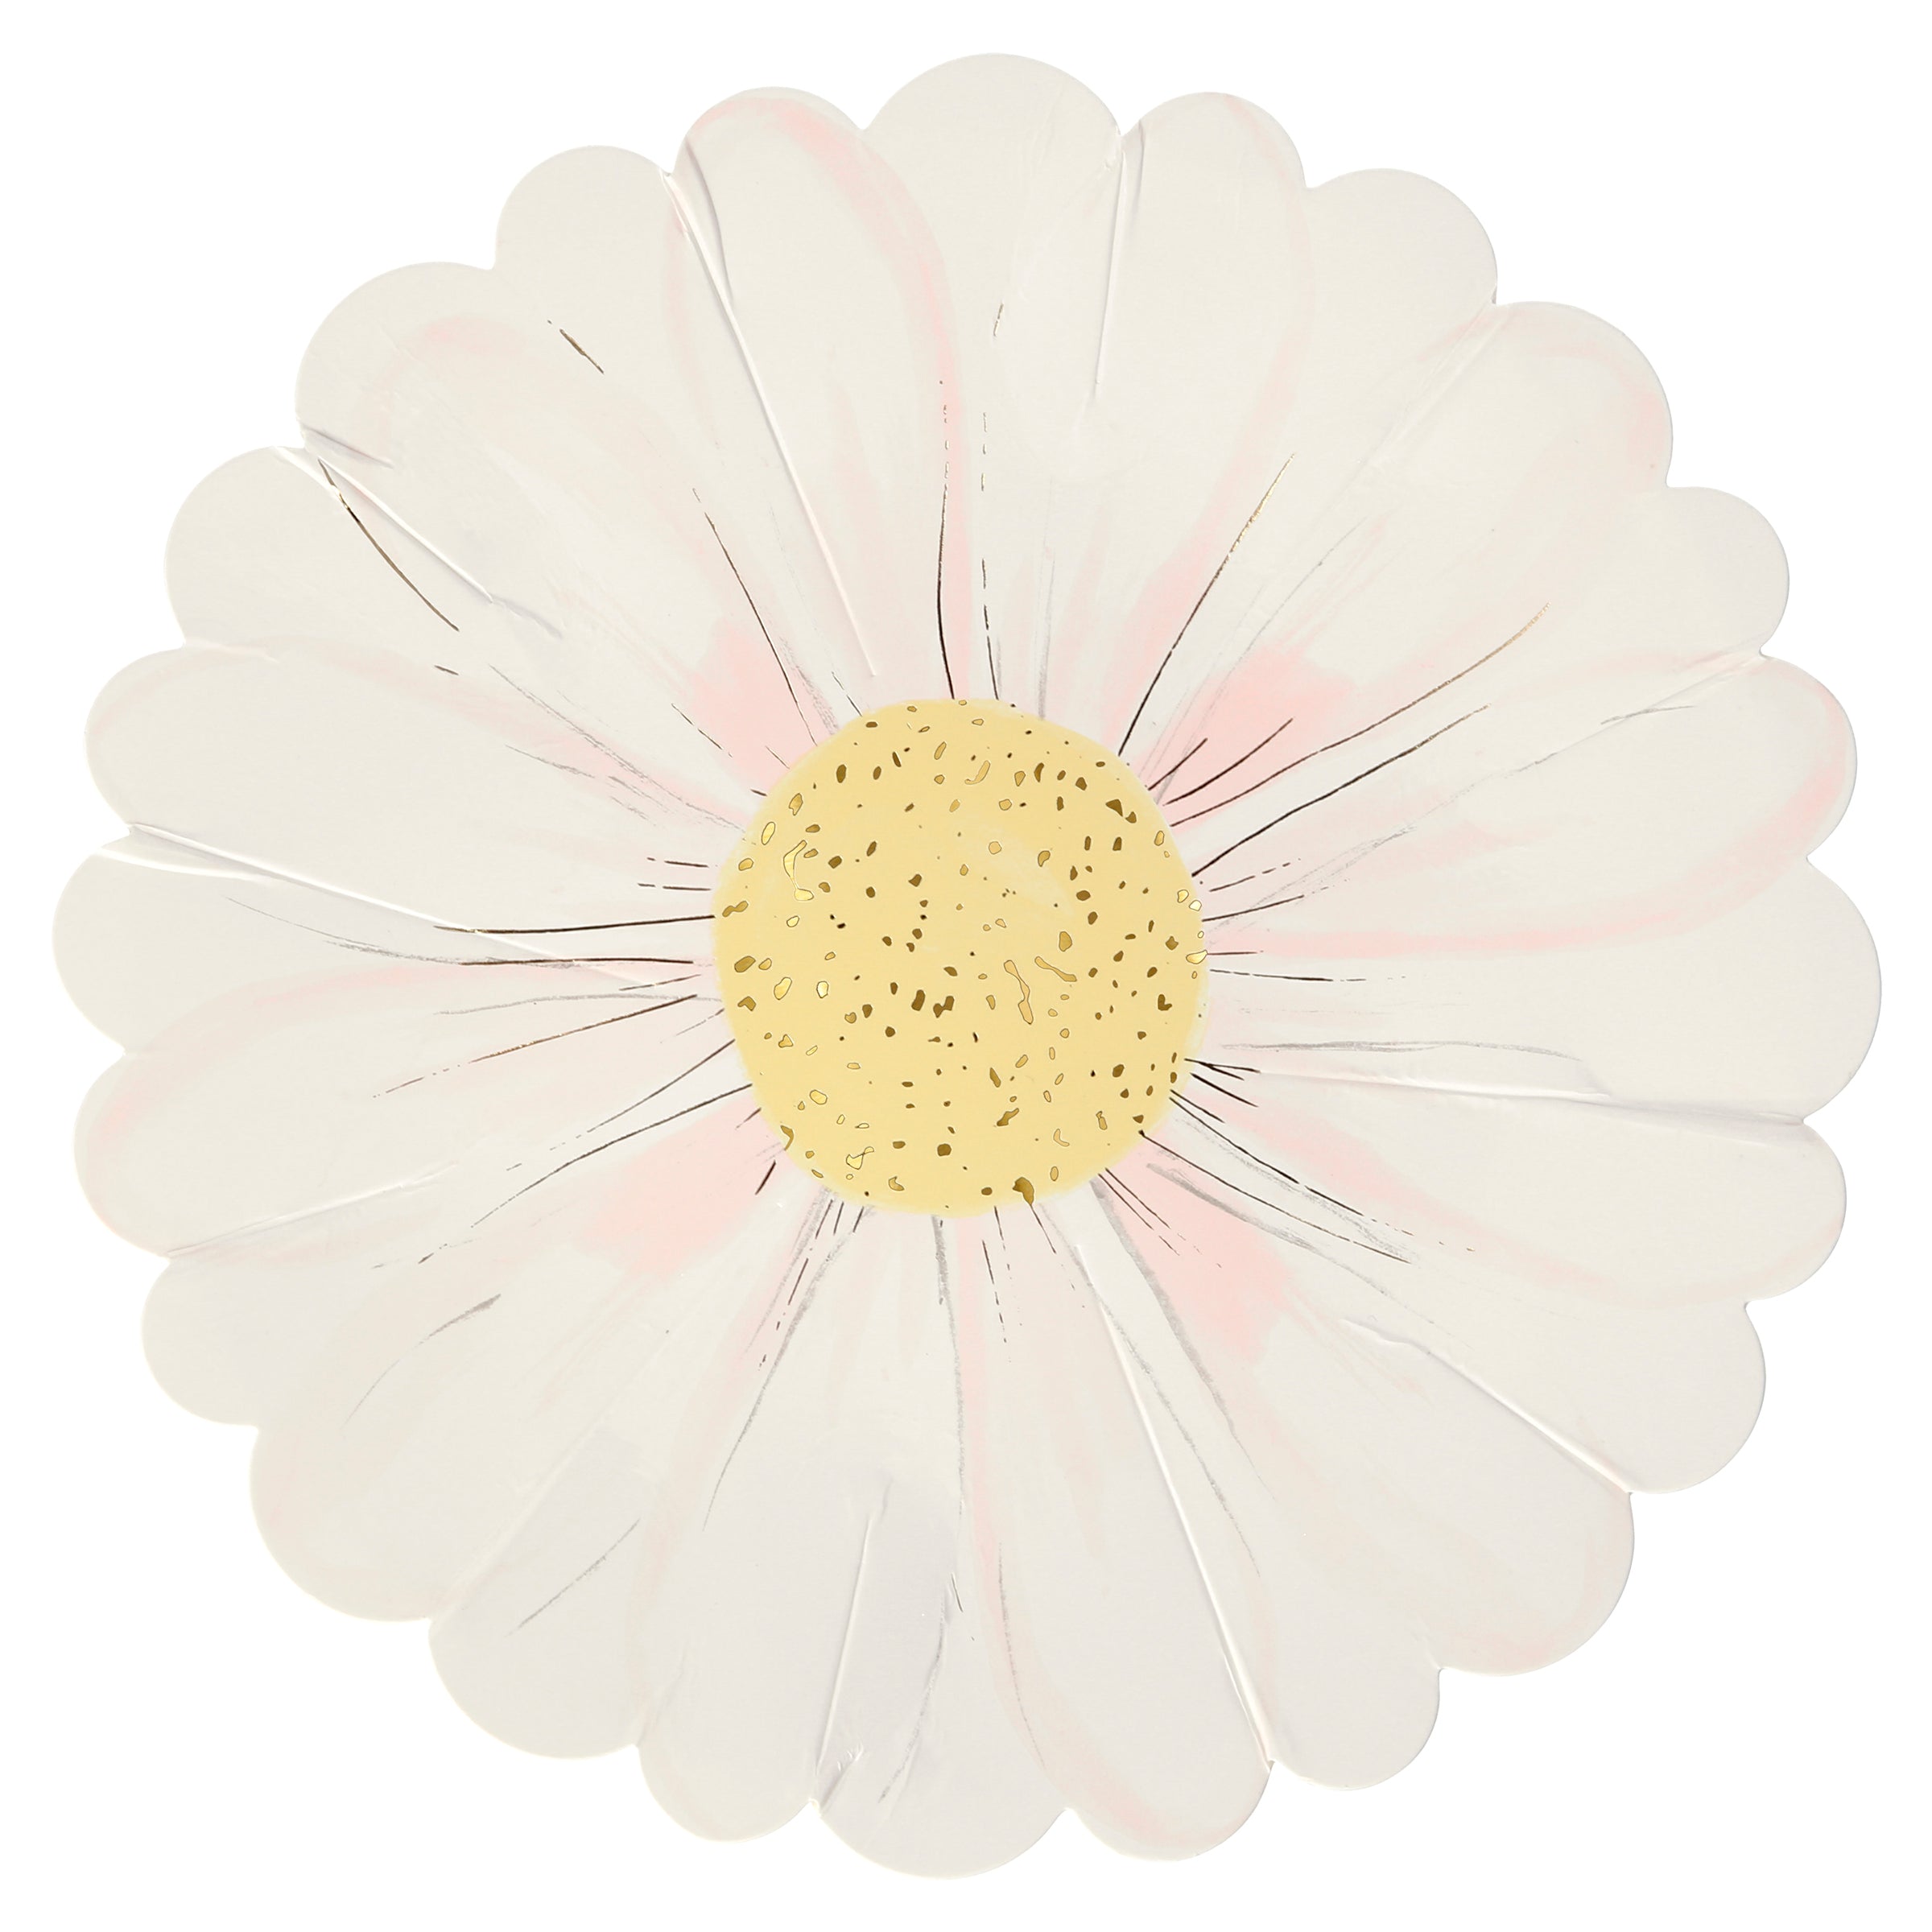 Our flower plates feature a beautifully illustrated daisy with shiny gold foil details.